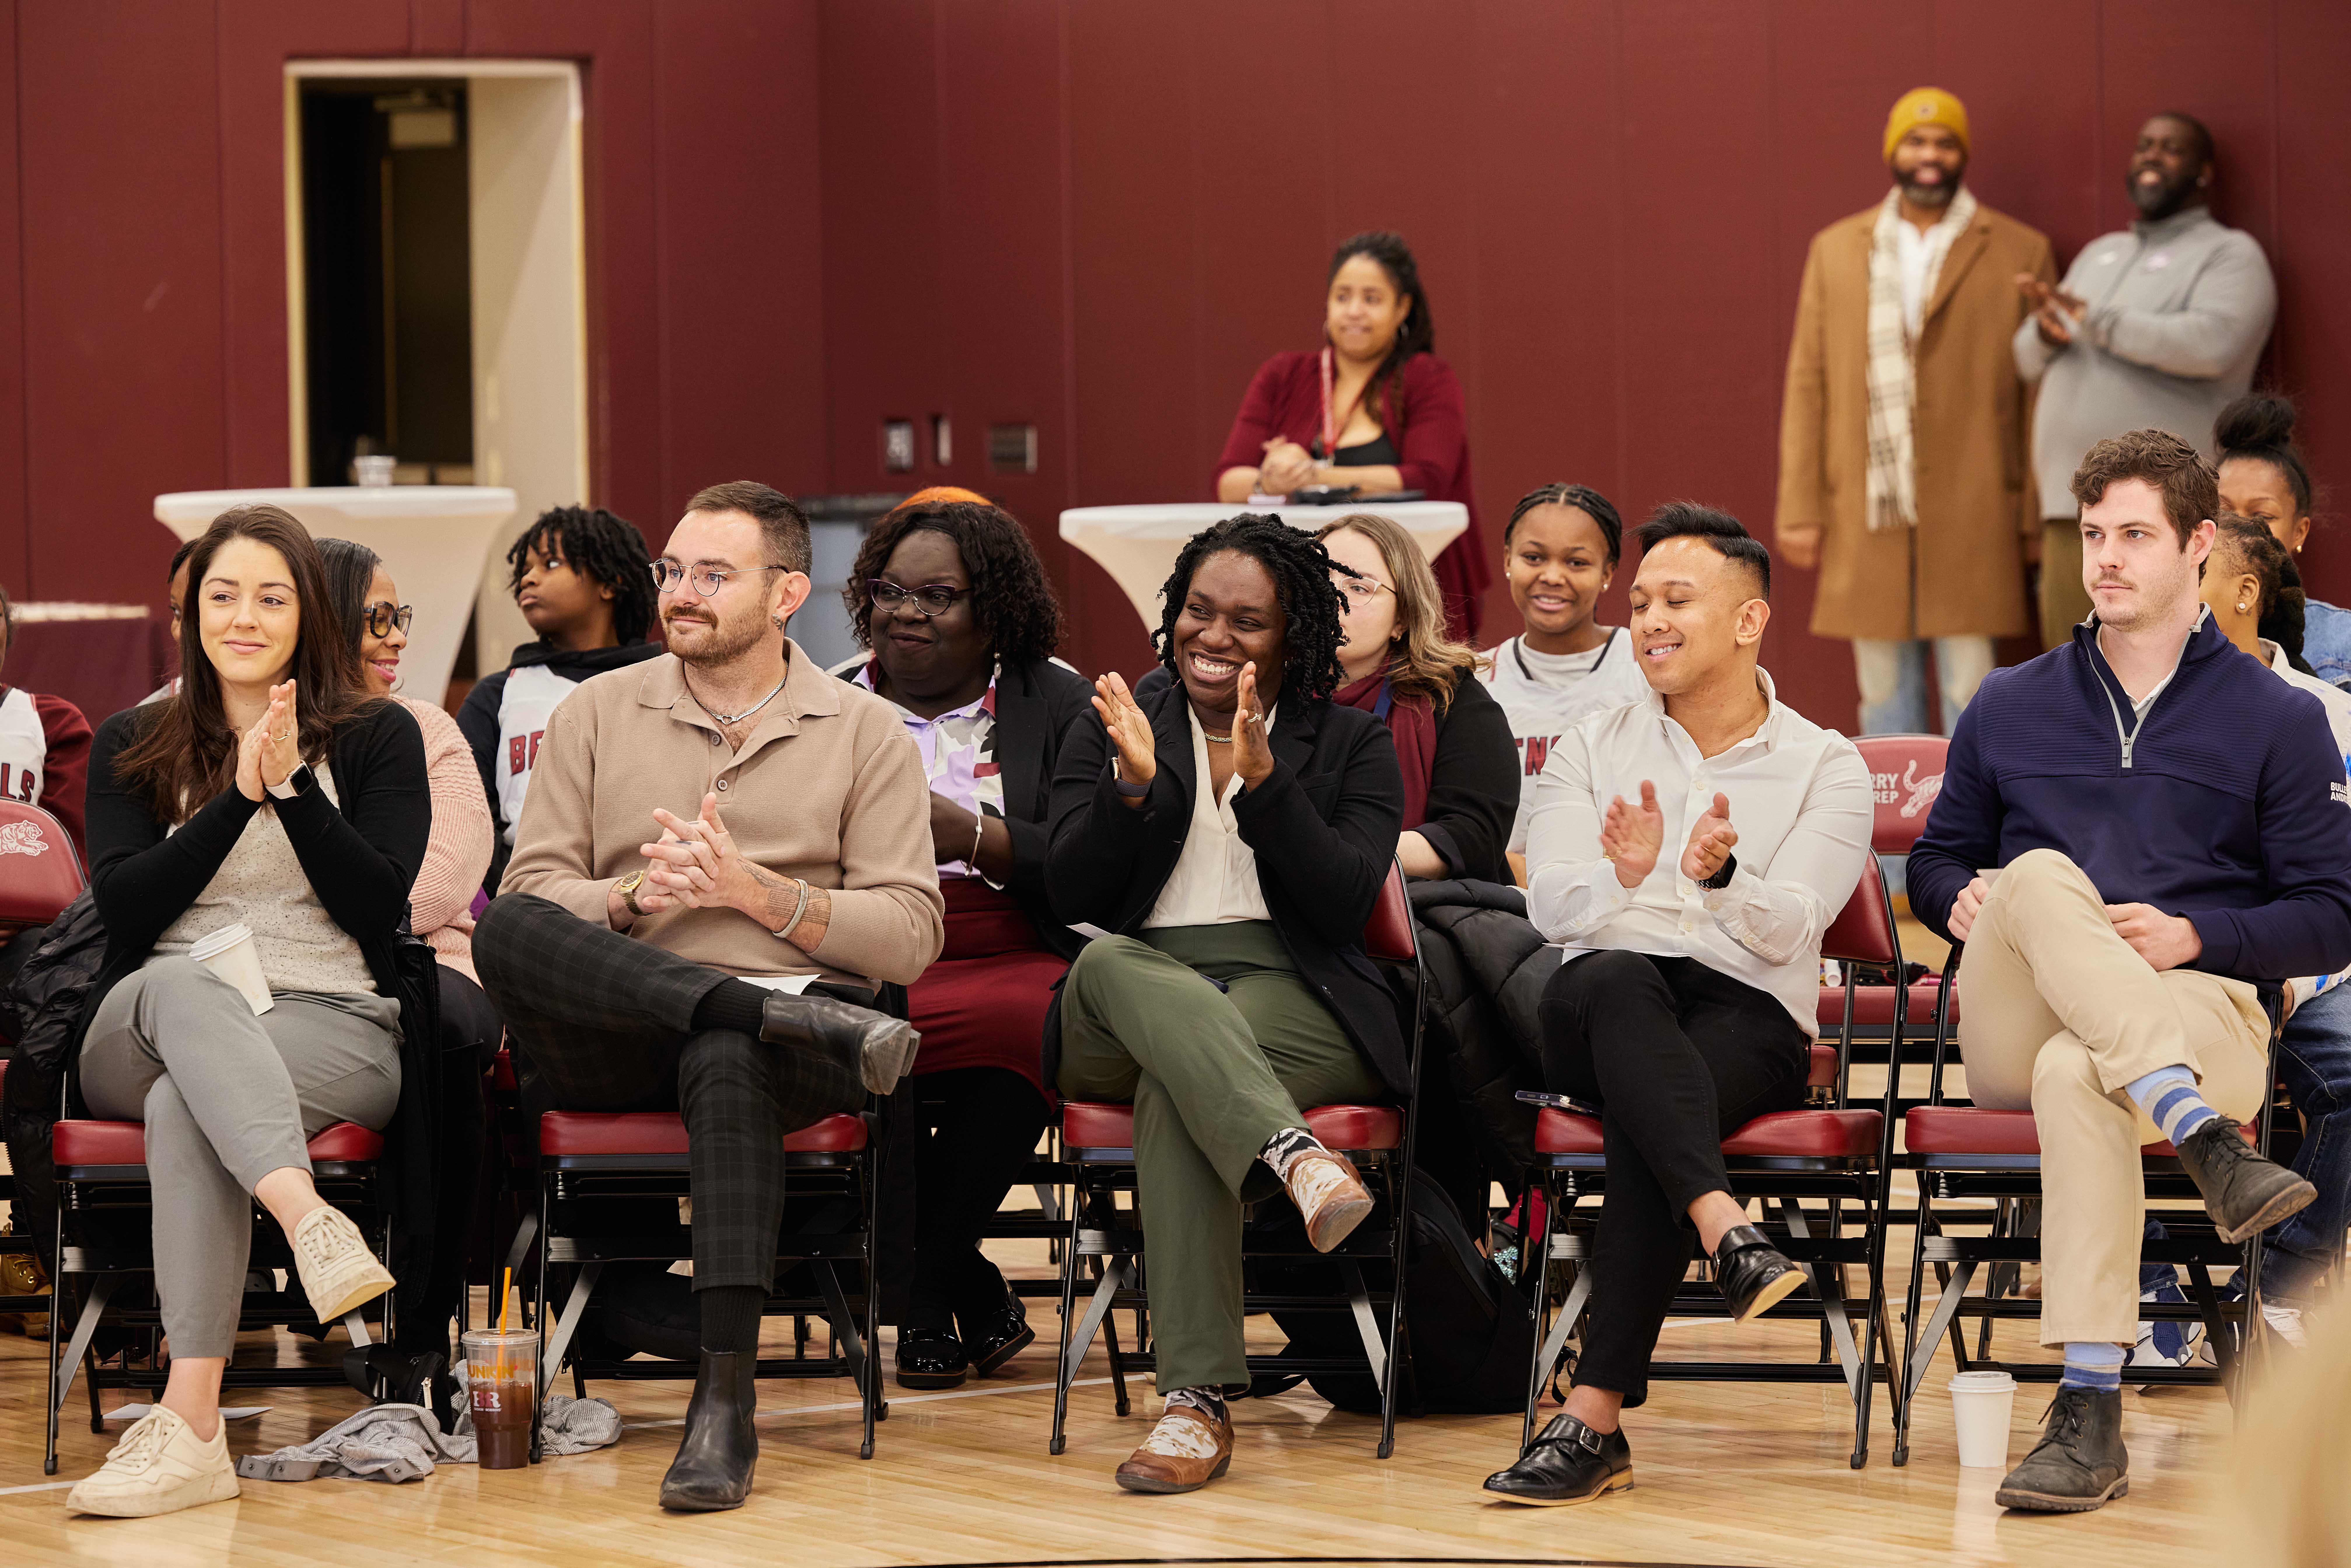 This photo shows a crowd of people sitting in chairs on a gym floor clapping and looking in the same direction at the Hansberry College Prep ribbon-cutting ceremony for their new gym renovation.